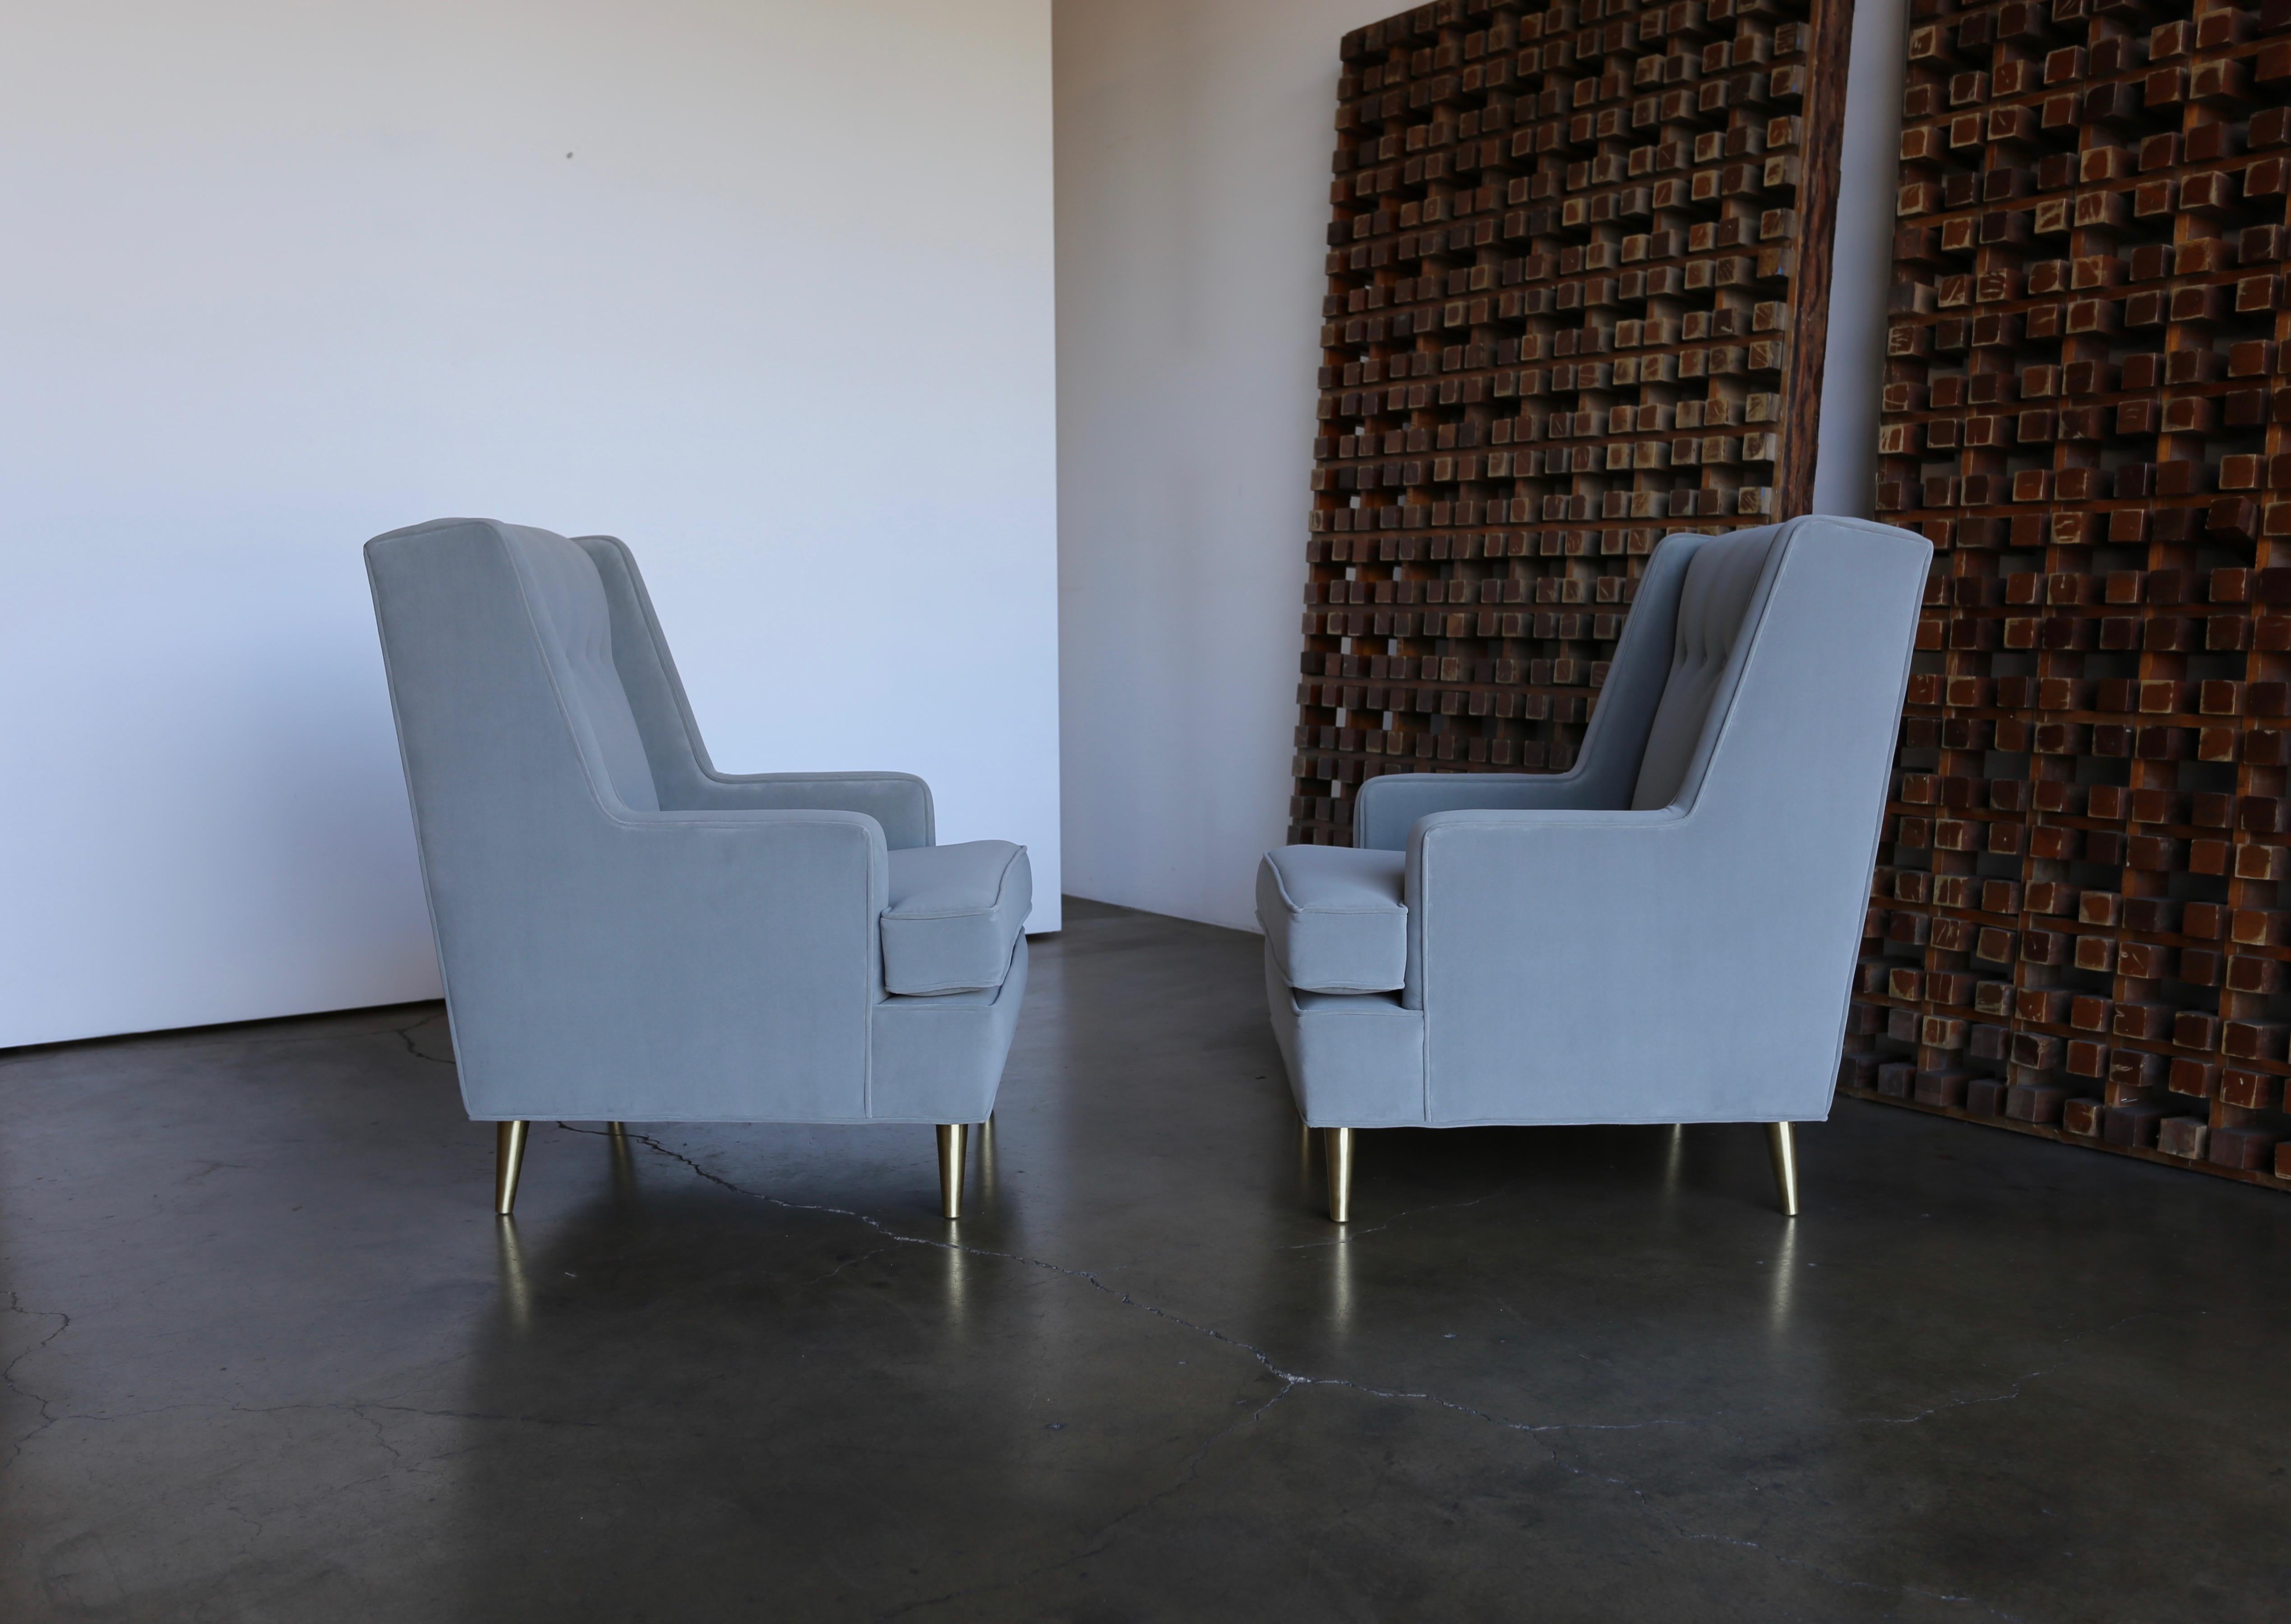 Pair of Lounge Chairs by Edward Wormley for Dunbar (20. Jahrhundert)